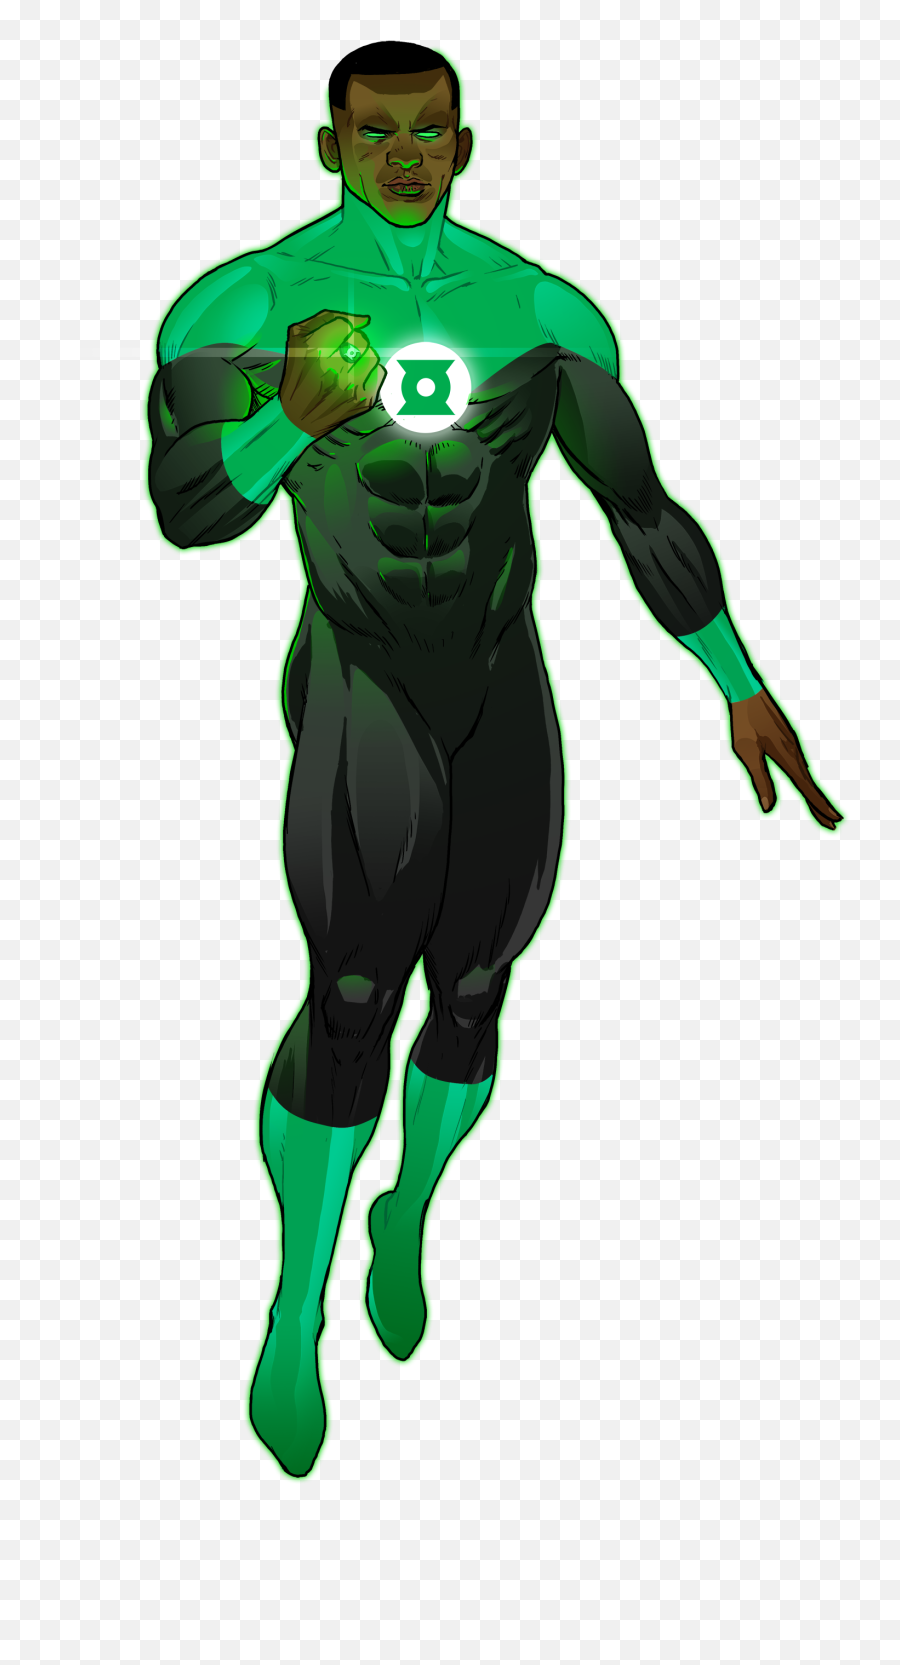 The Power Of Diversity 10 Classic Superheroes Reimagined - African American Green Lantern Png,Green Lantern Transparent